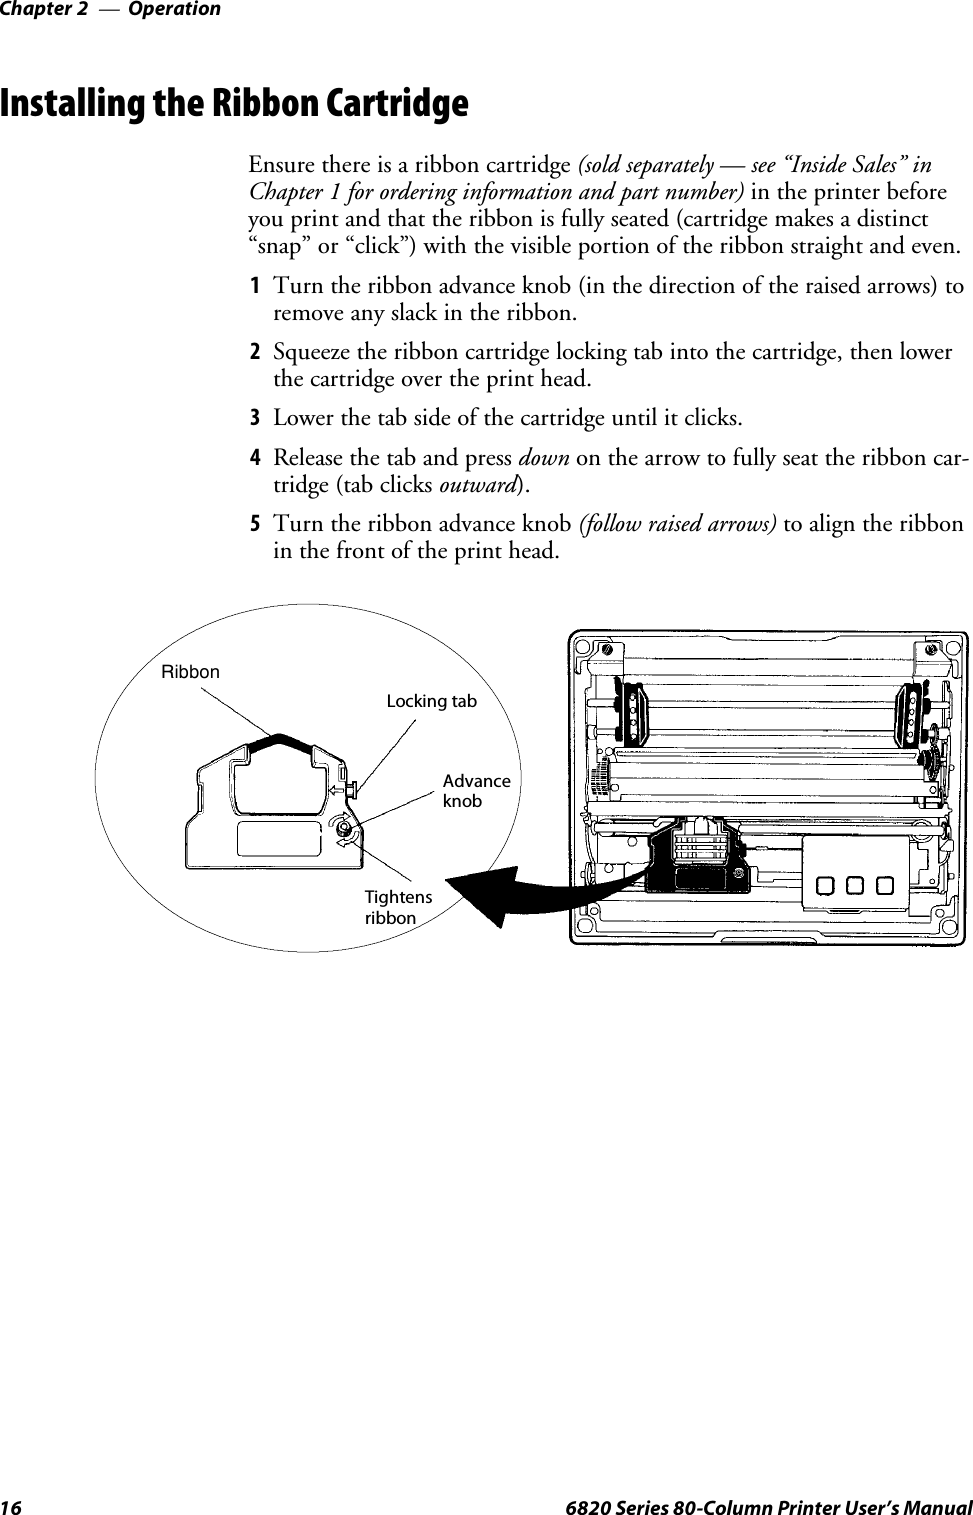 OperationChapter —216 6820 Series 80-Column Printer User’s ManualInstalling the Ribbon CartridgeEnsure there is a ribbon cartridge (sold separately — see “Inside Sales” inChapter 1 for ordering information and part number) in the printer beforeyou print and that the ribbon is fully seated (cartridge makes a distinct“snap” or “click”) with the visible portion of the ribbon straight and even.1Turn the ribbon advance knob (in the direction of the raised arrows) toremove any slack in the ribbon.2Squeeze the ribbon cartridge locking tab into the cartridge, then lowerthe cartridge over the print head.3Lower the tab side of the cartridge until it clicks.4Release the tab and press down on the arrow to fully seat the ribbon car-tridge (tab clicks outward).5Turn the ribbon advance knob (follow raised arrows) to align the ribbonin the front of the print head.RibbonLocking tabAdvanceknobTightensribbon